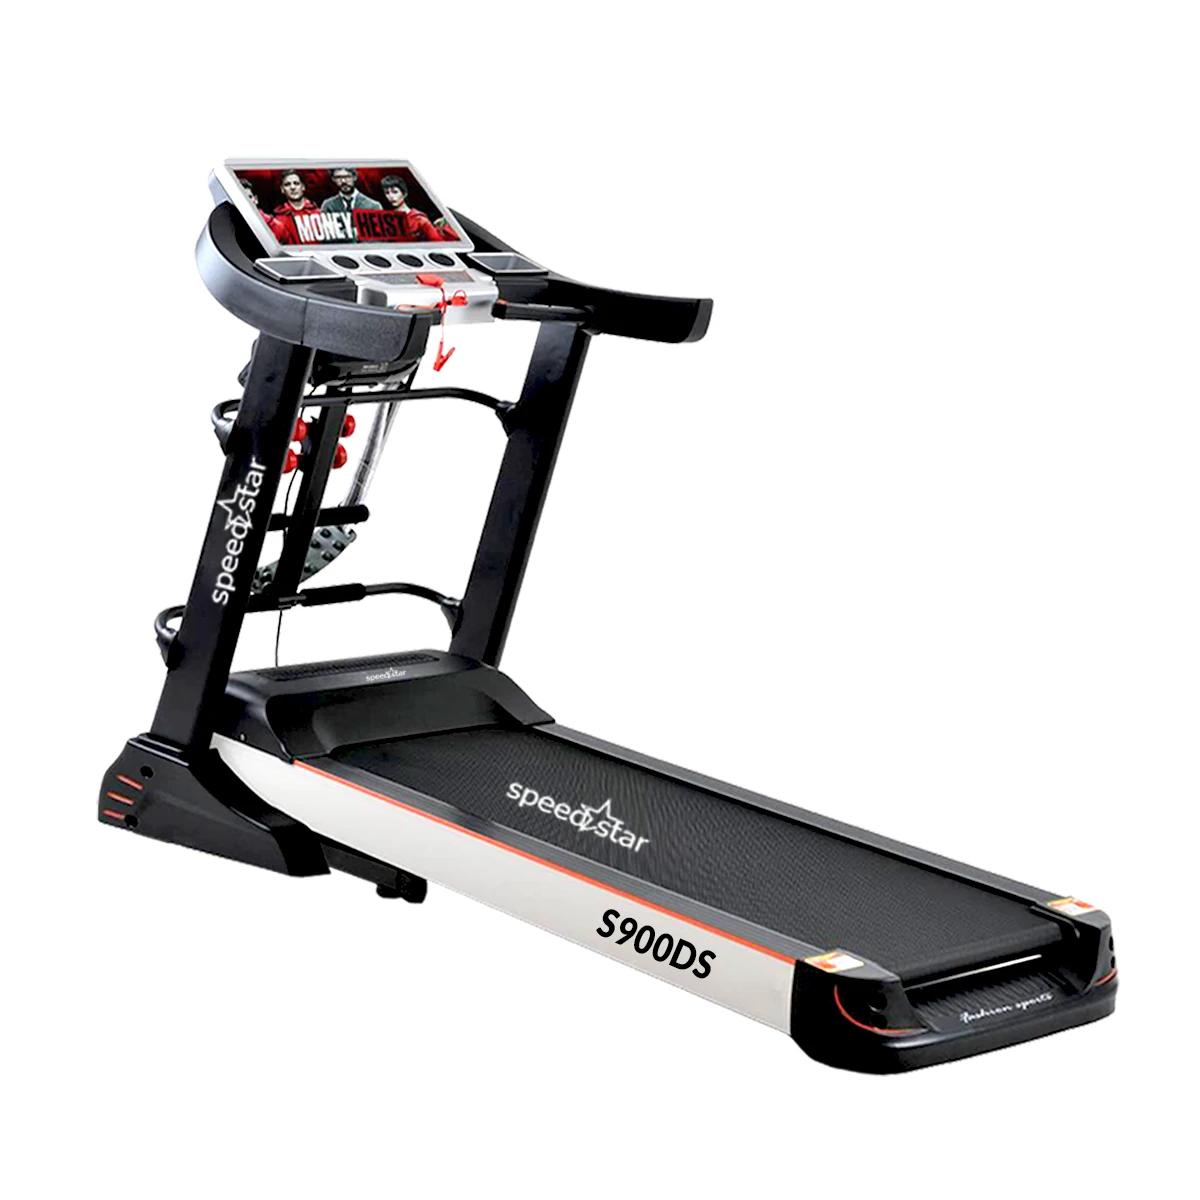 Speed Star S900DS (DC Motor 3.5HP Peak) Smart Android Foldable Motorized Treadmill